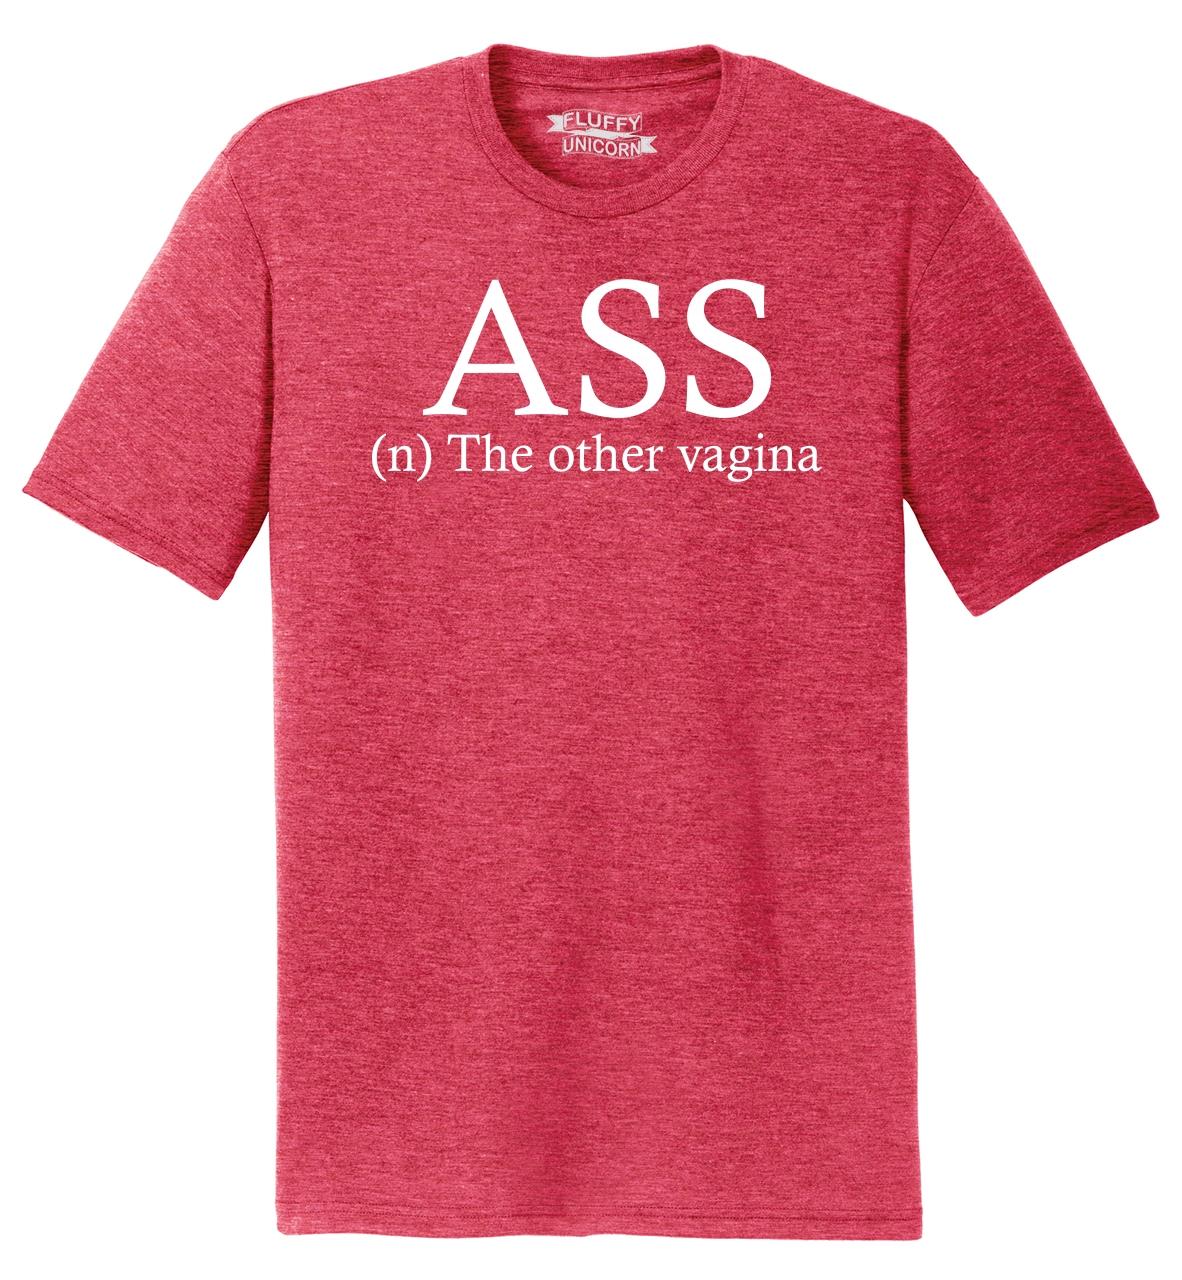 Mens Ass Other Vagina Funny Rude Sexual Shirt Tri Blend Tee Pussy